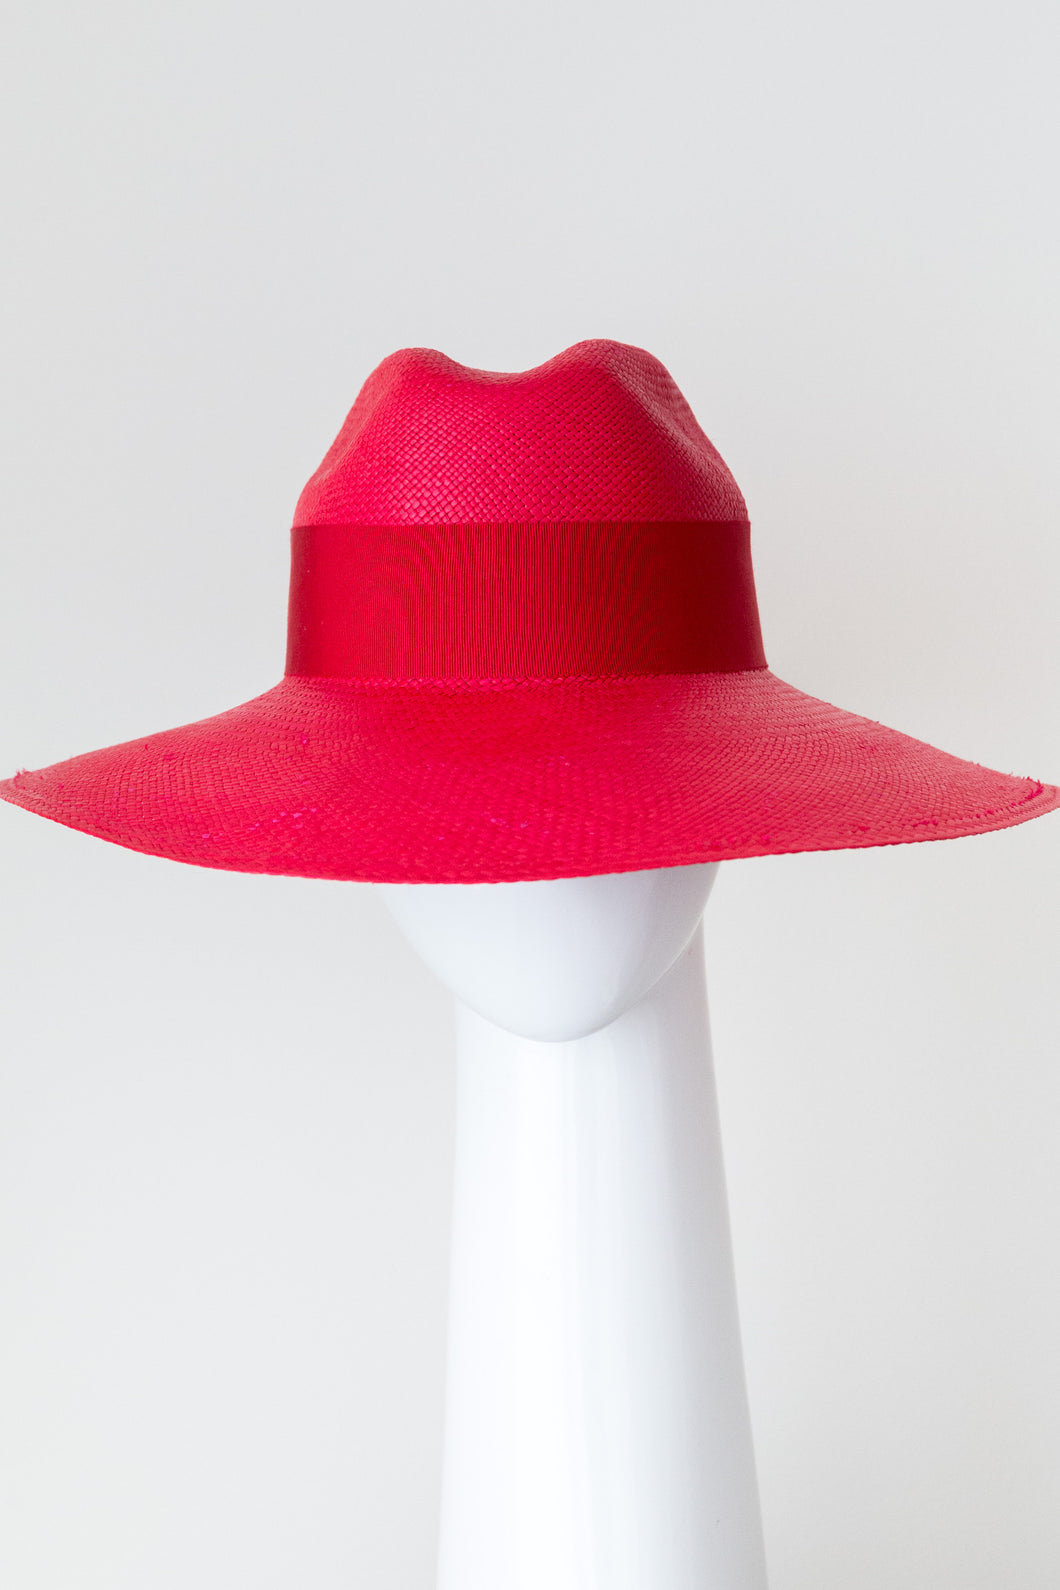 Red Panama Fedora with wide red ribbon trim